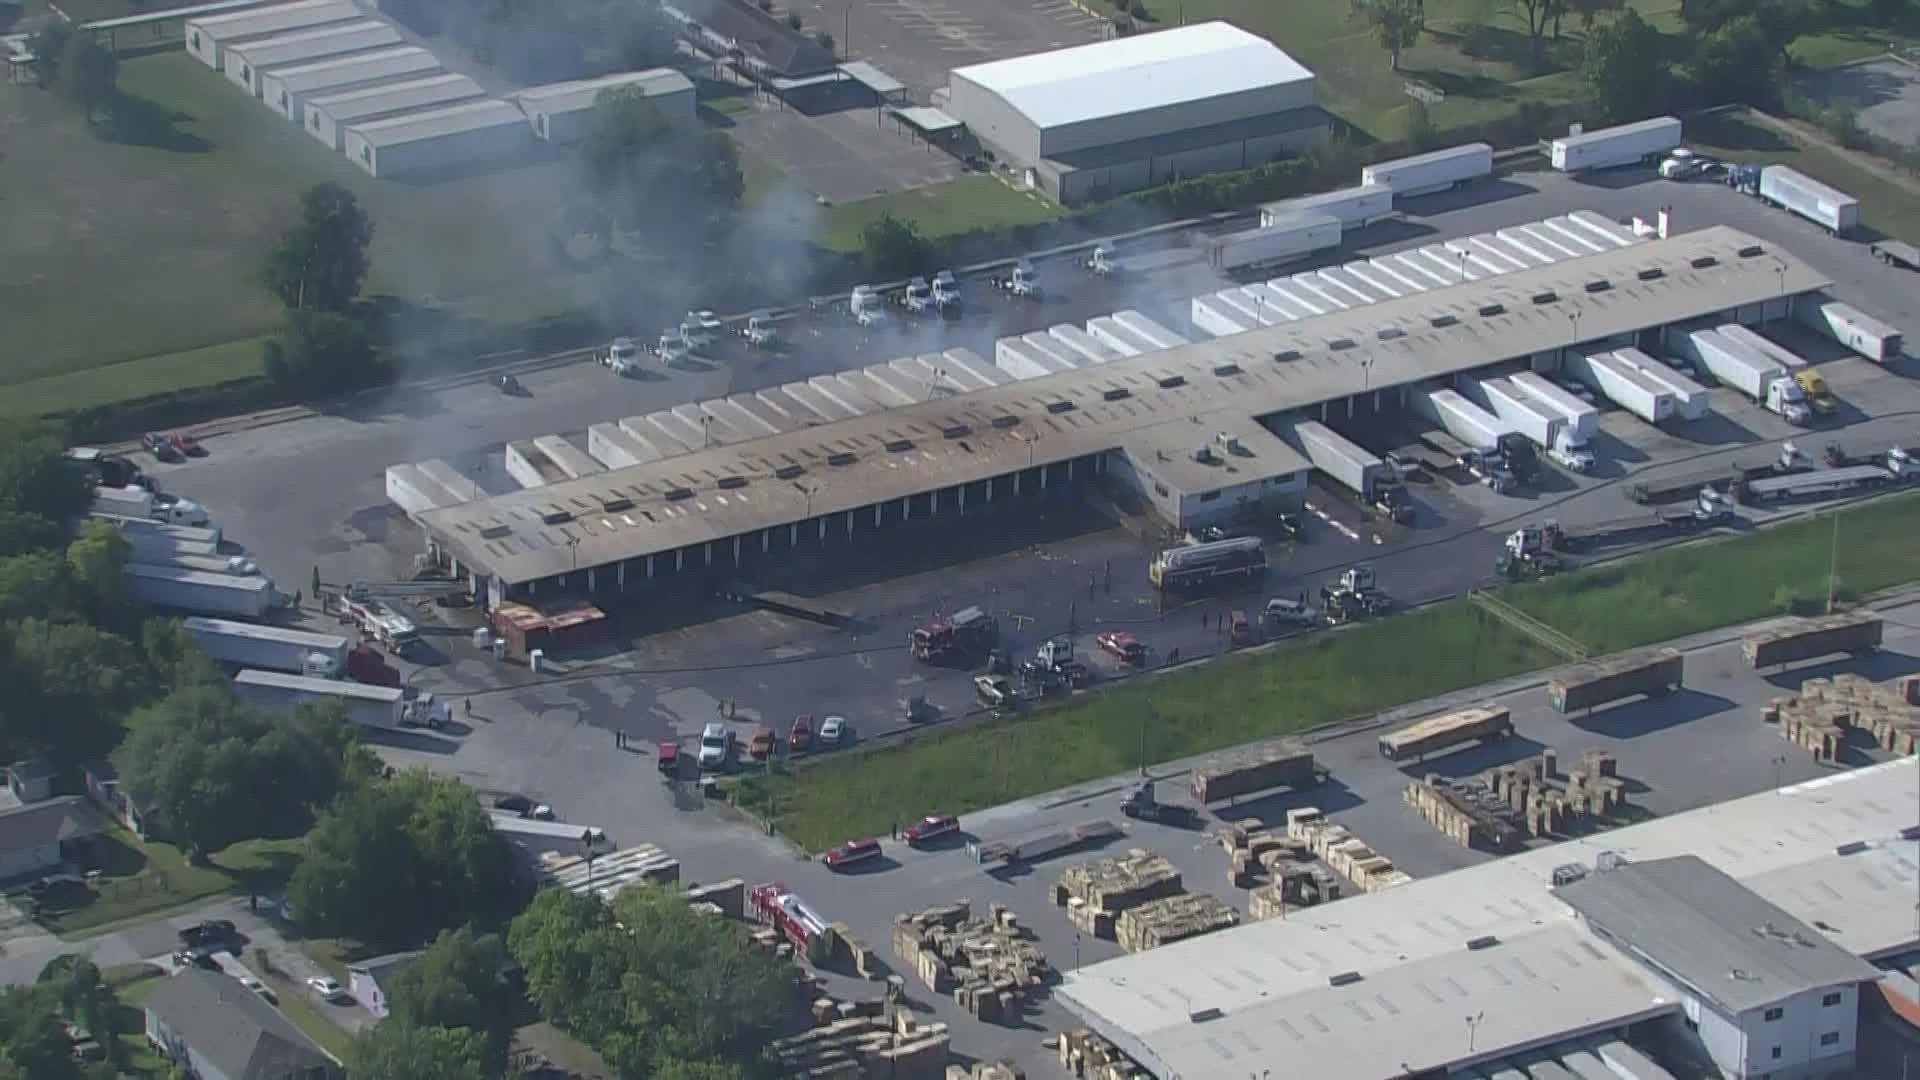 Firefighters battled a 2-alarm fire at a warehouse in northeast Houston Wednesday, Oct. 5. The cause of the fire is unknown. No one was injured.